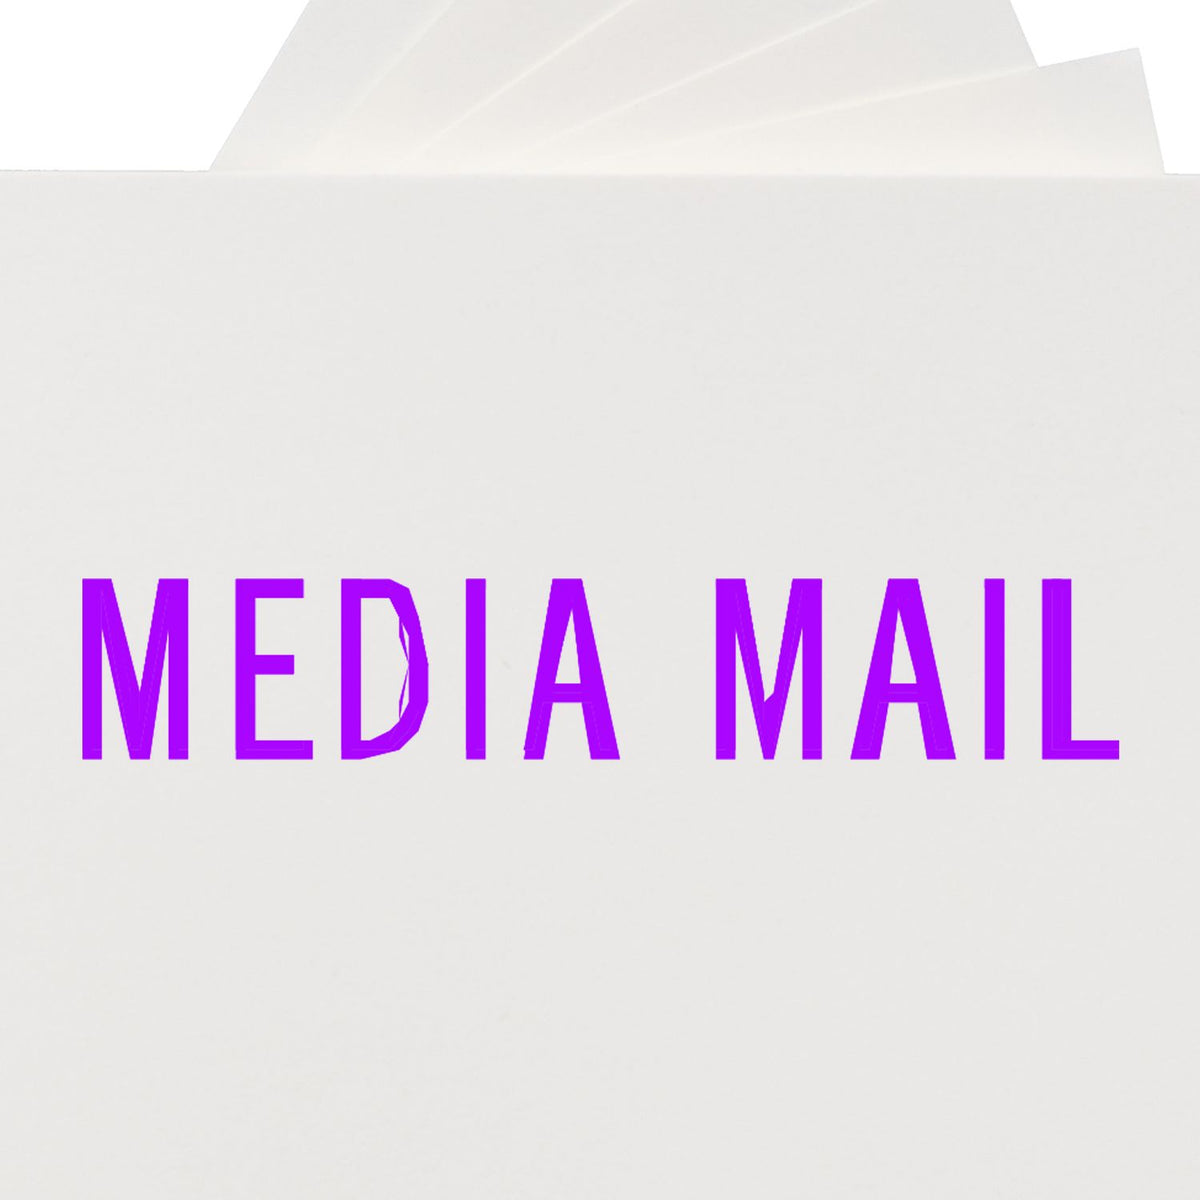 Media Mail Rubber Stamp In Use